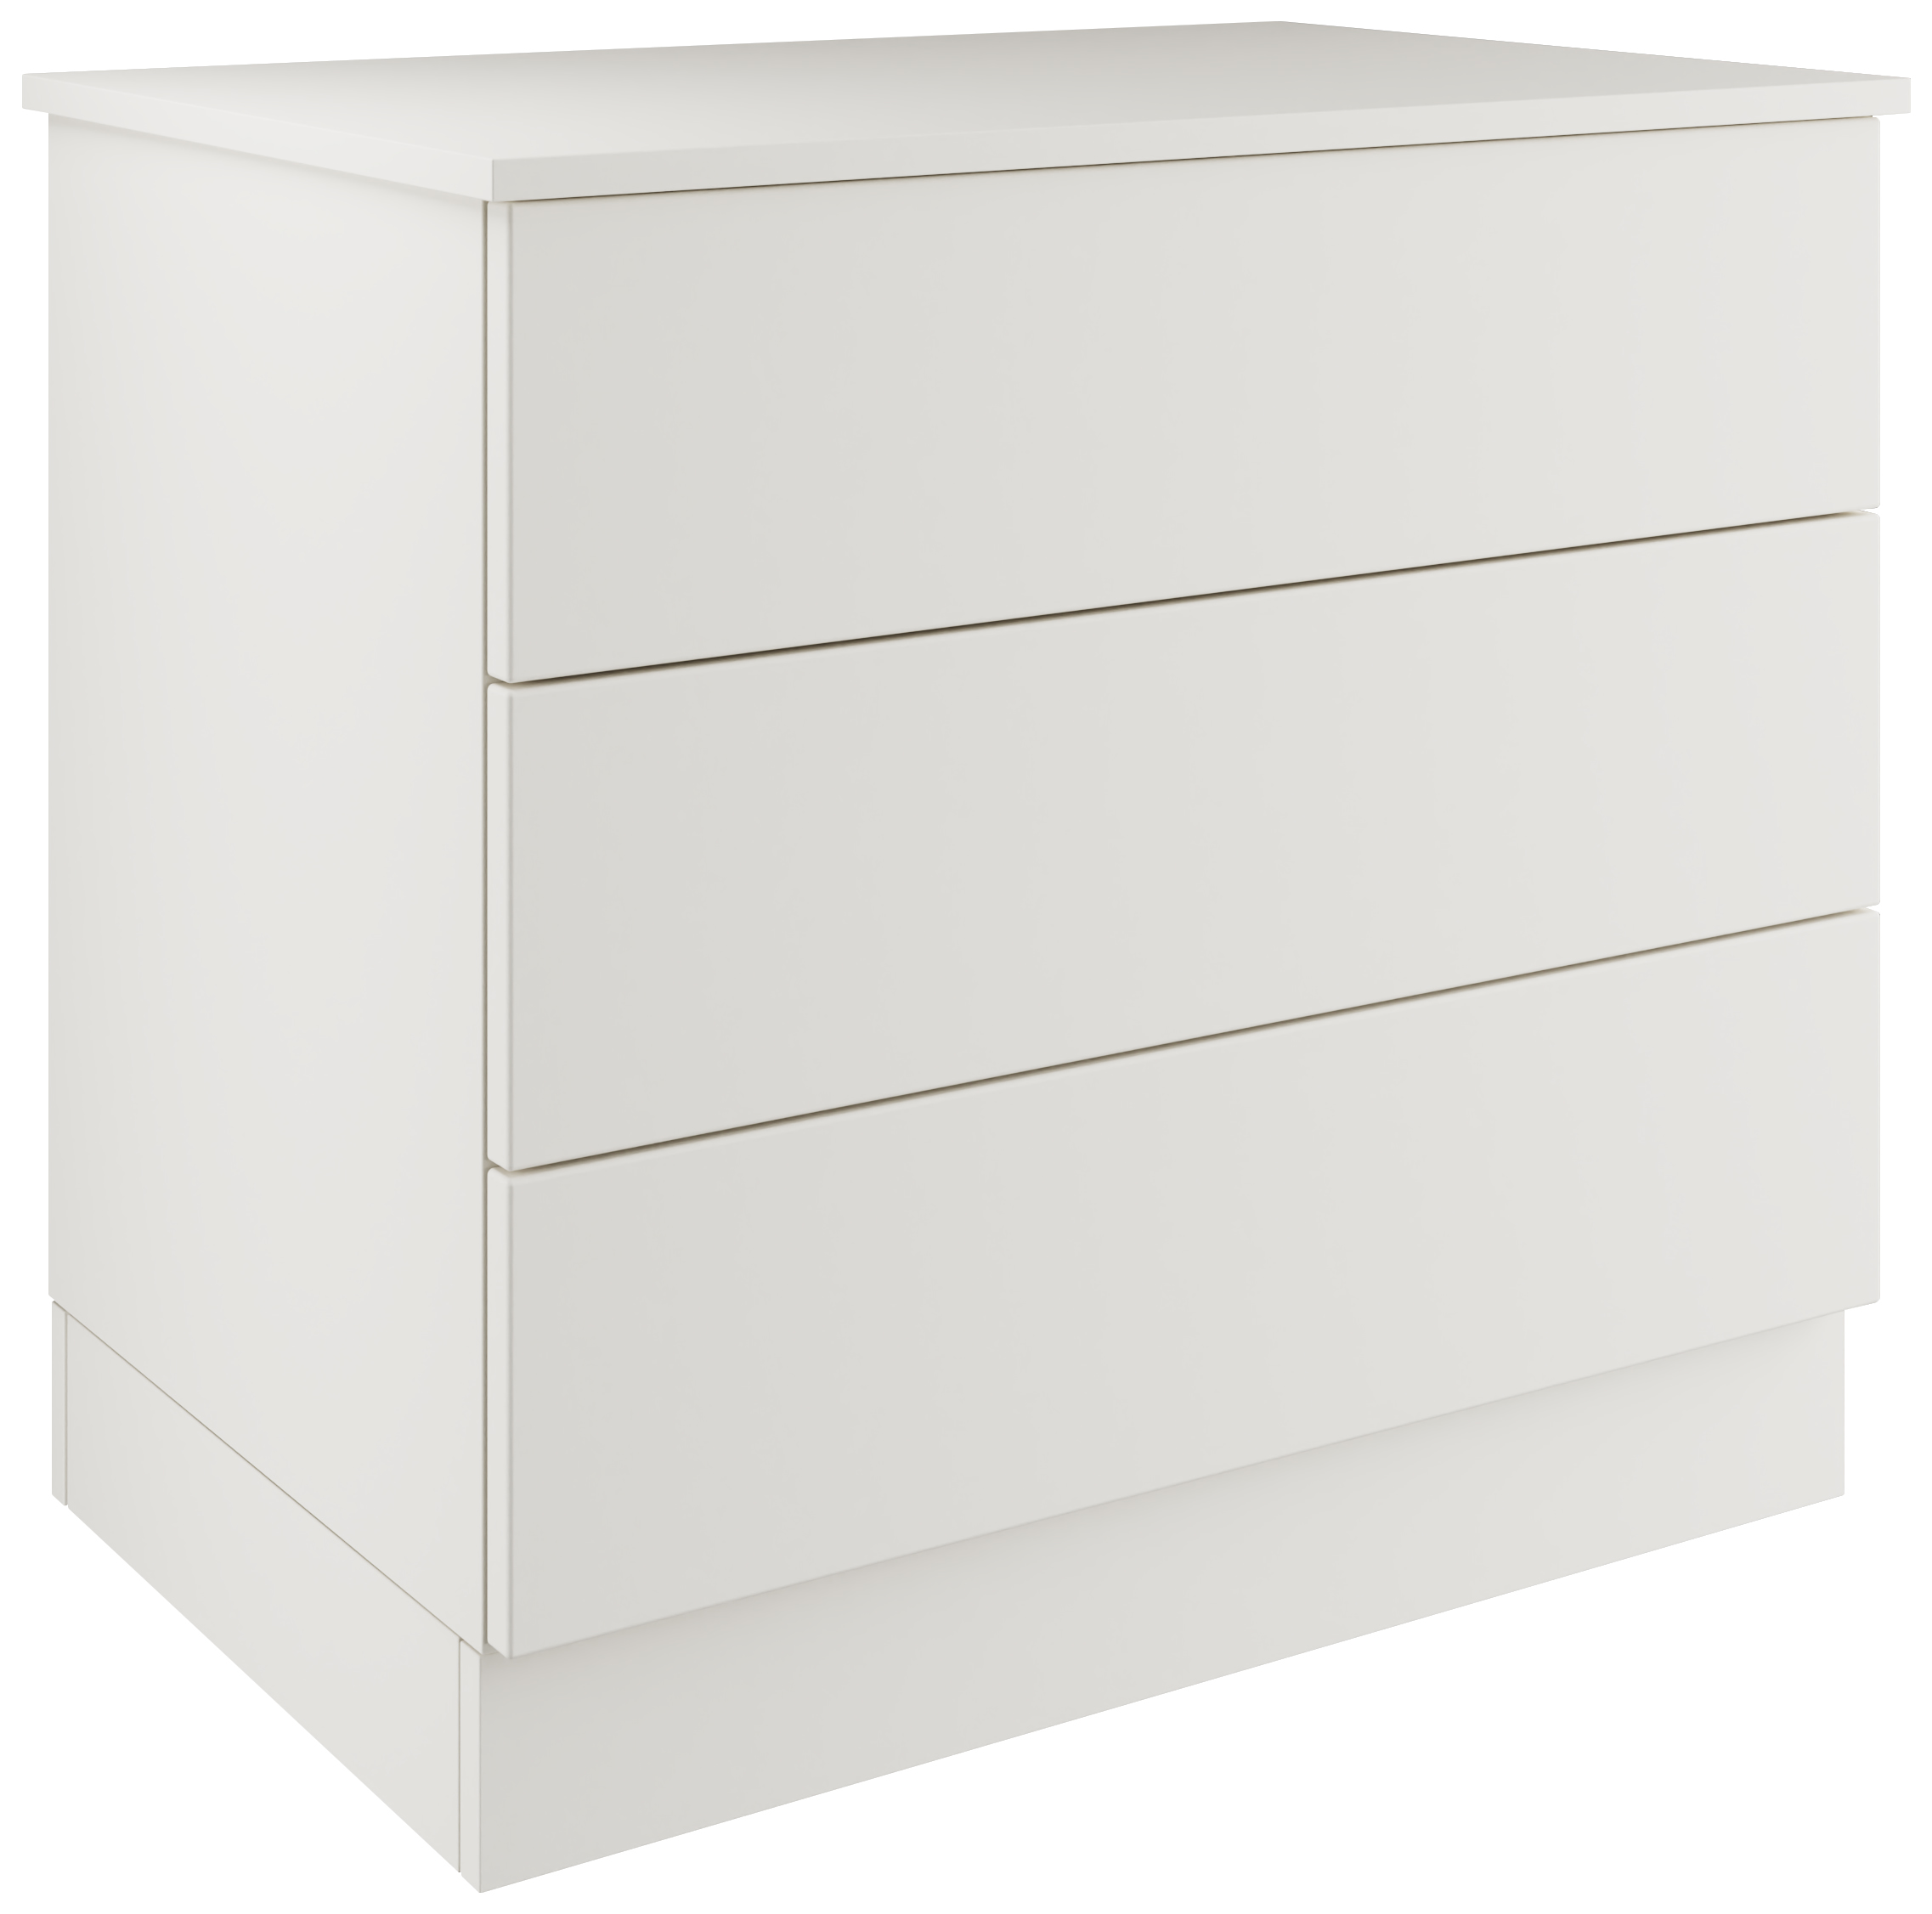 Harrogate & Bramham White Double Chest with 3 Drawers - 820 x 730 x 520mm